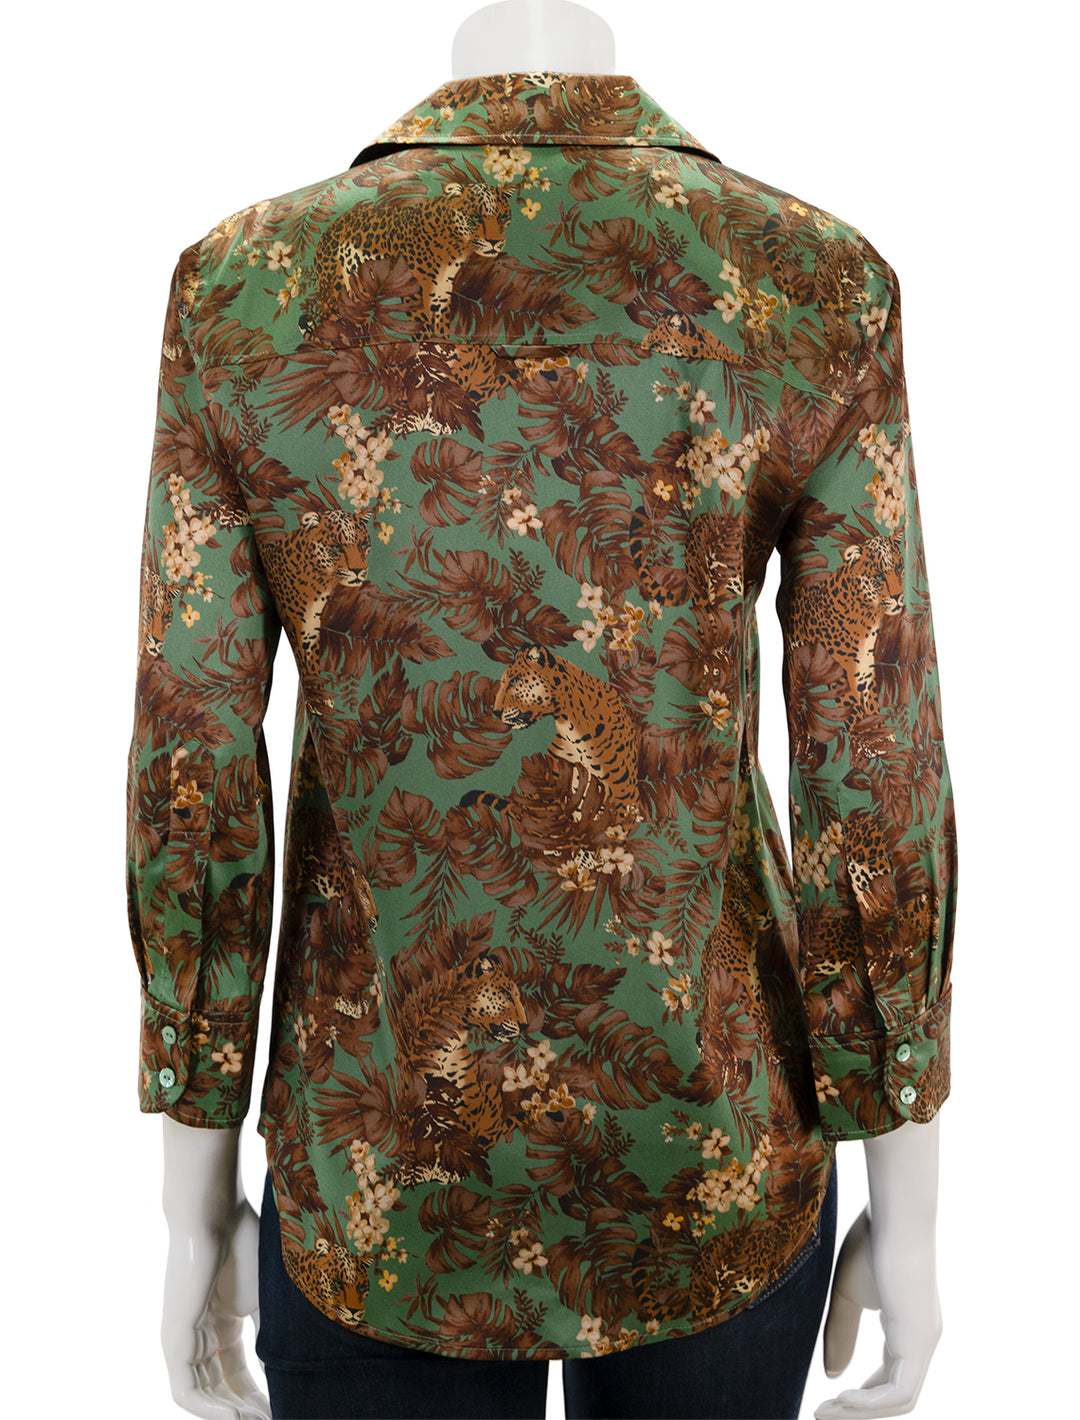 Back view of L'agence's dani in olive multi palm leopard.